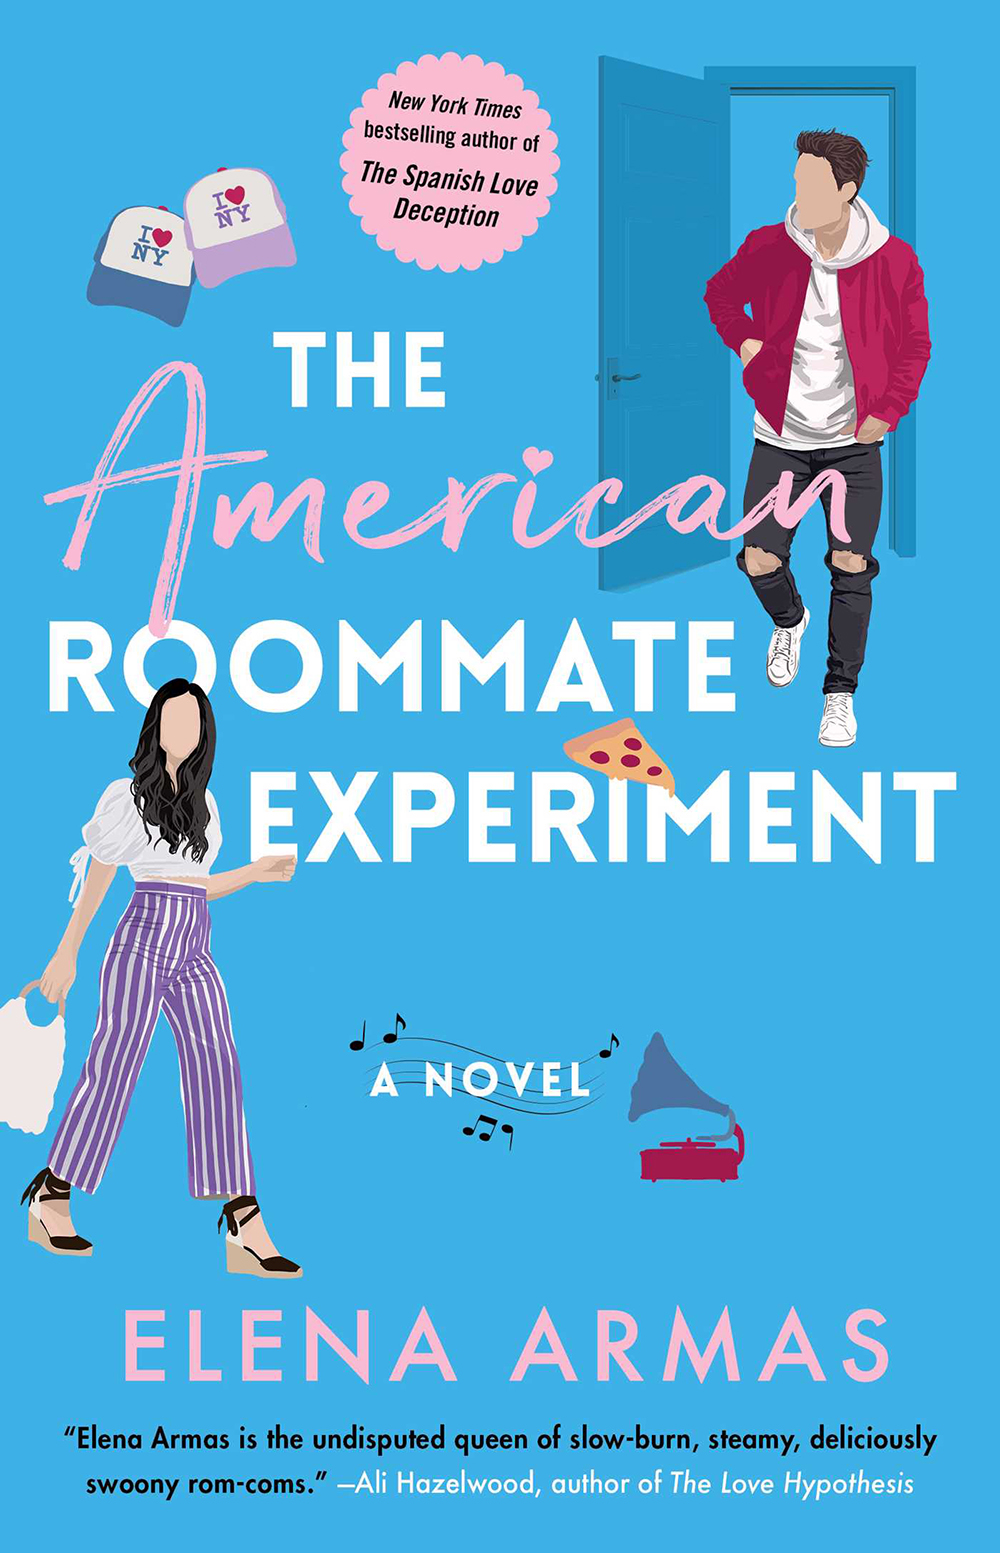 The cover of Elena Armas' romance novel The American Roommate Experiment